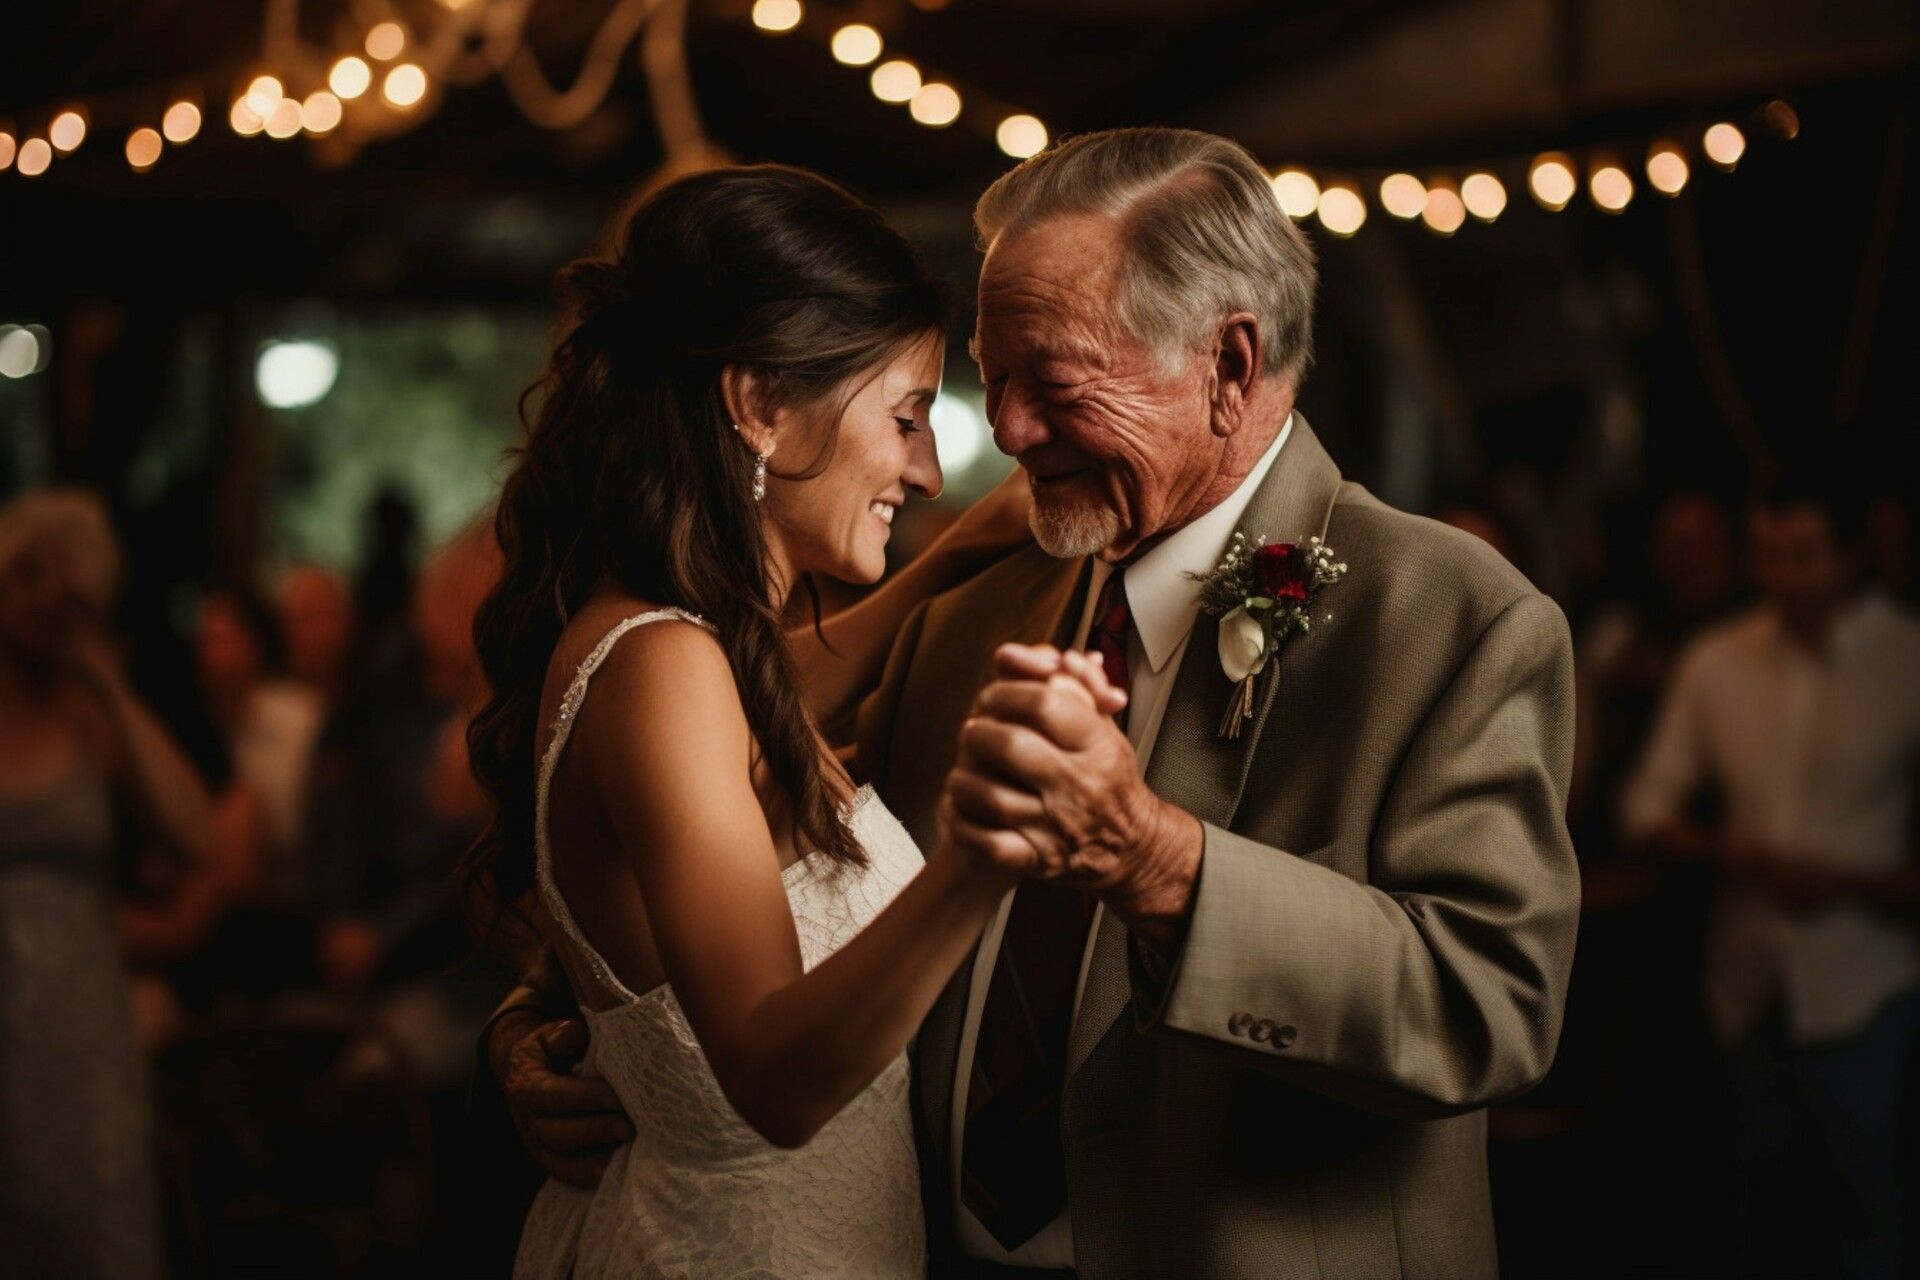 Father/Daughter dance ideas, dad/daughter dances, father/daughter playlists